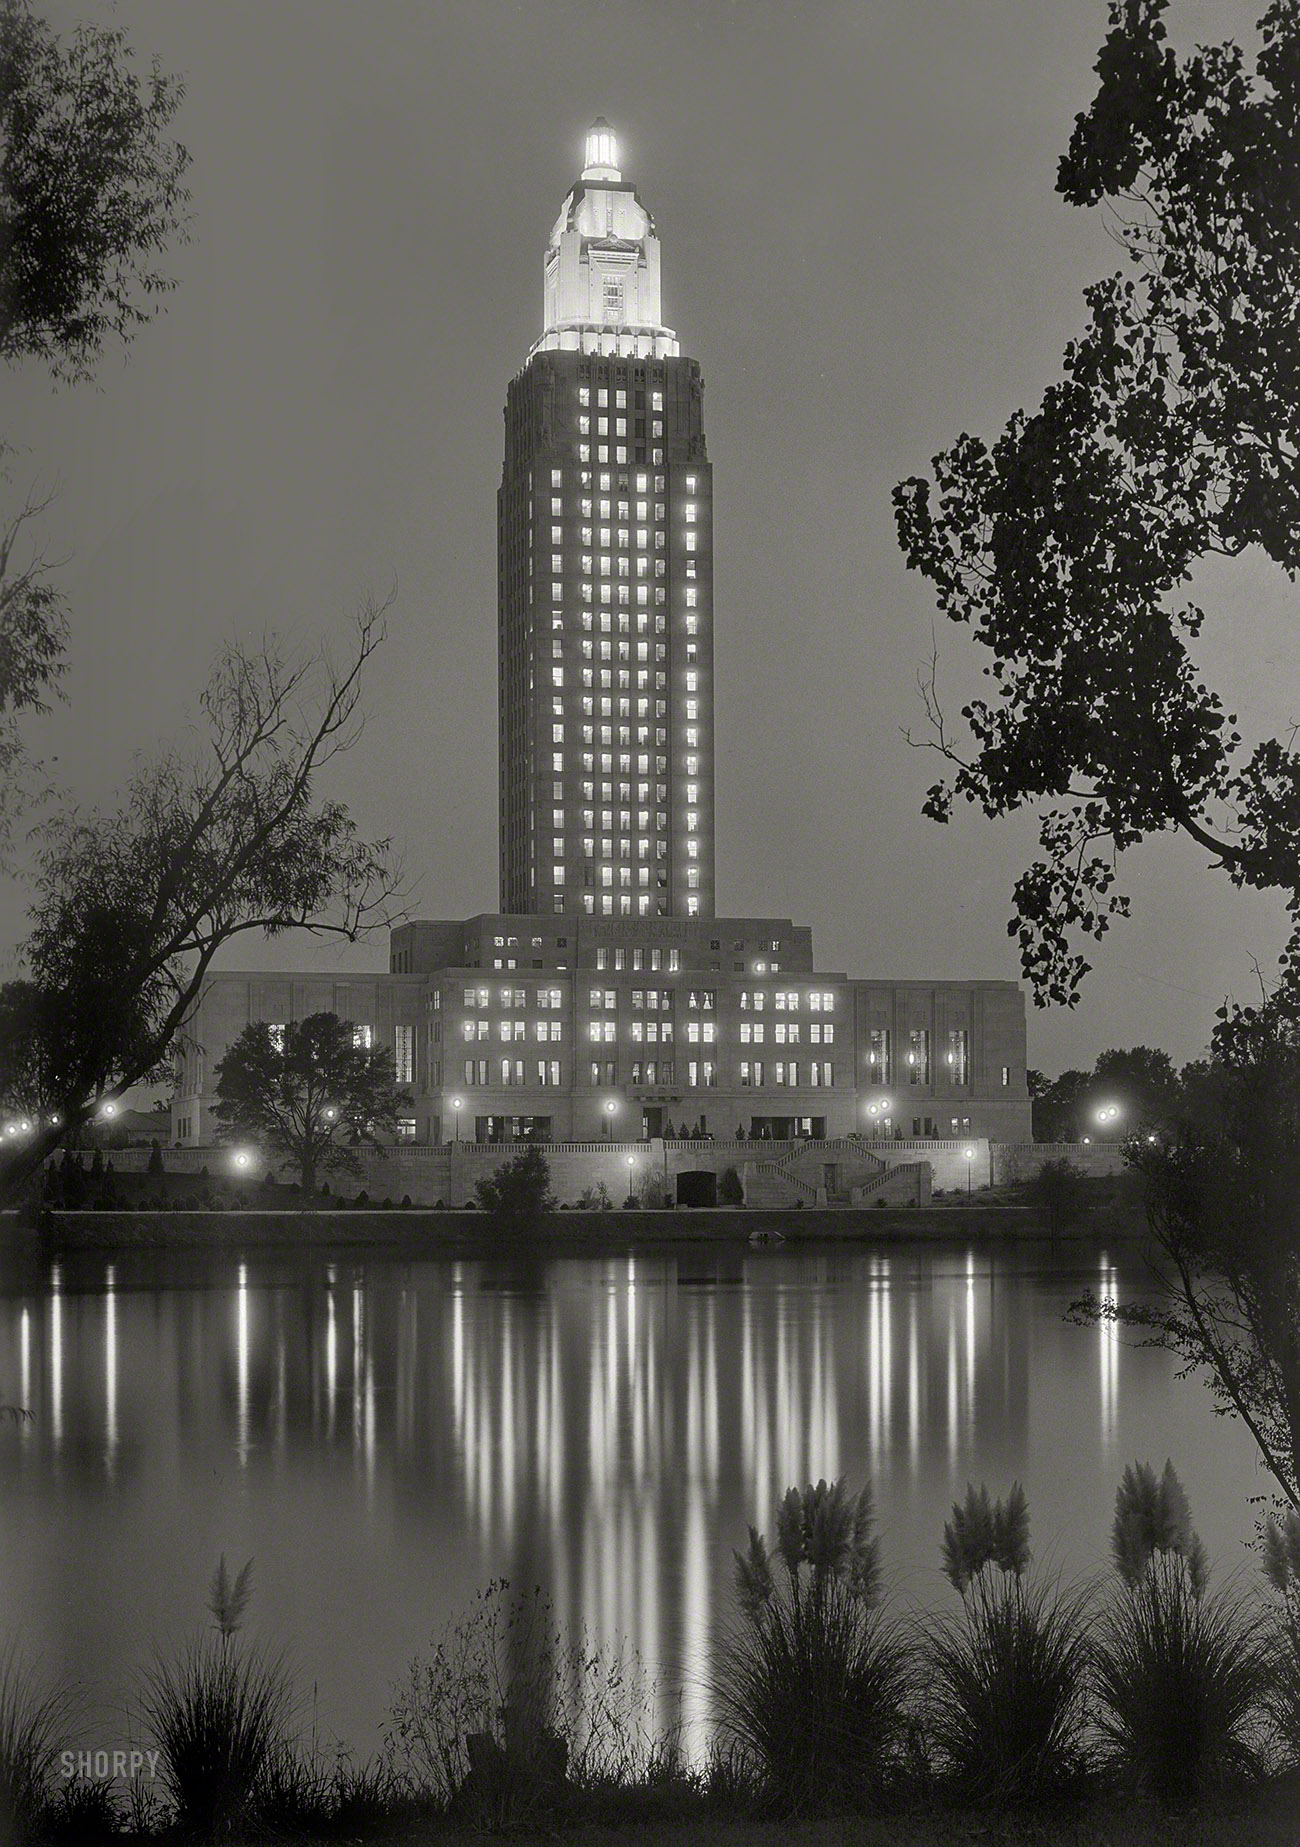 September 1932. "Louisiana State Capitol at Baton Rouge. Tower lights at night. Gov. O.K. Allen. Weiss, Dreyfous & Seiferth, client." Where Huey Long was assassinated. Large-format negative by Gottscho-Schleisner. View full size.